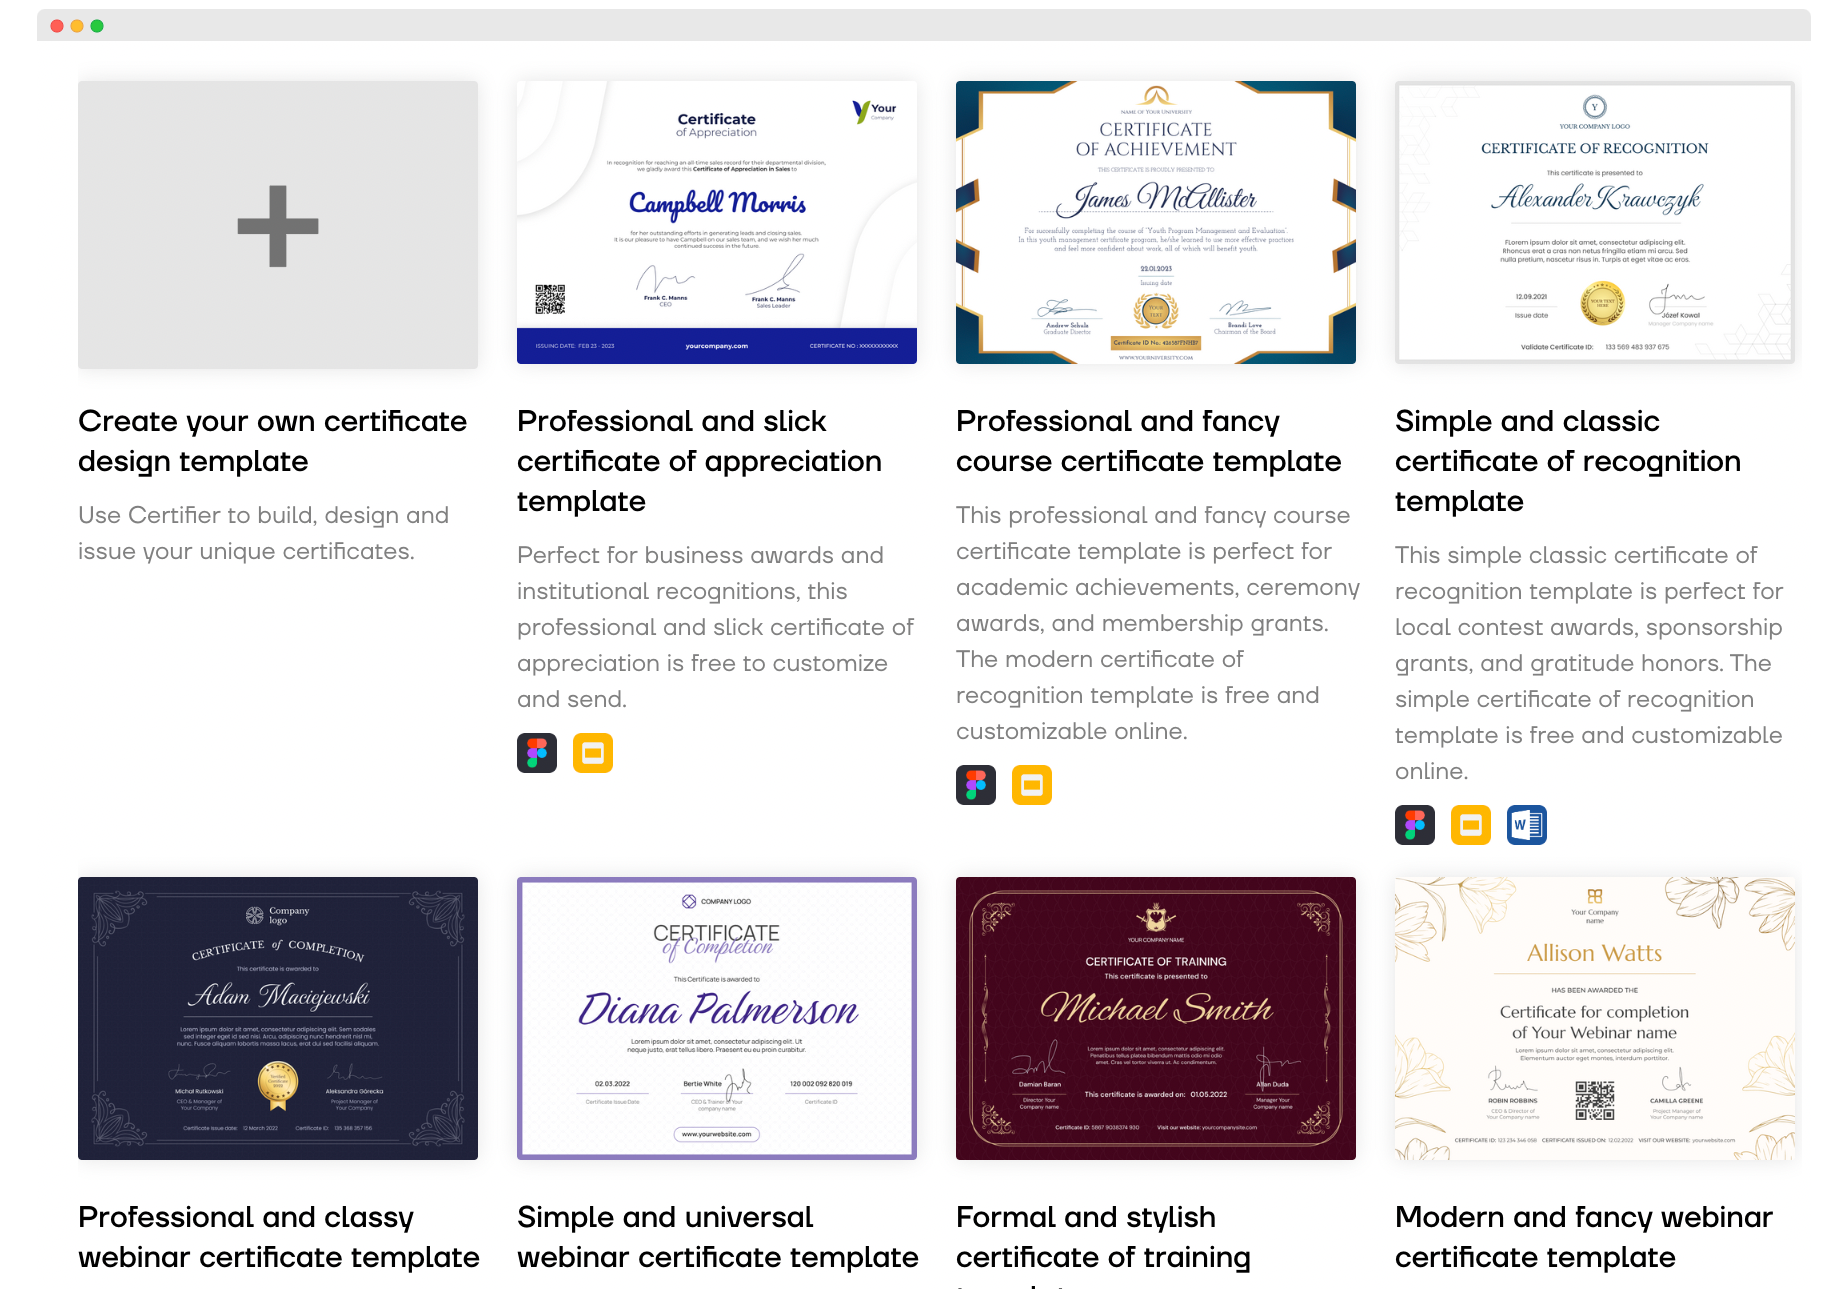 Certifier free certificate templates examples.